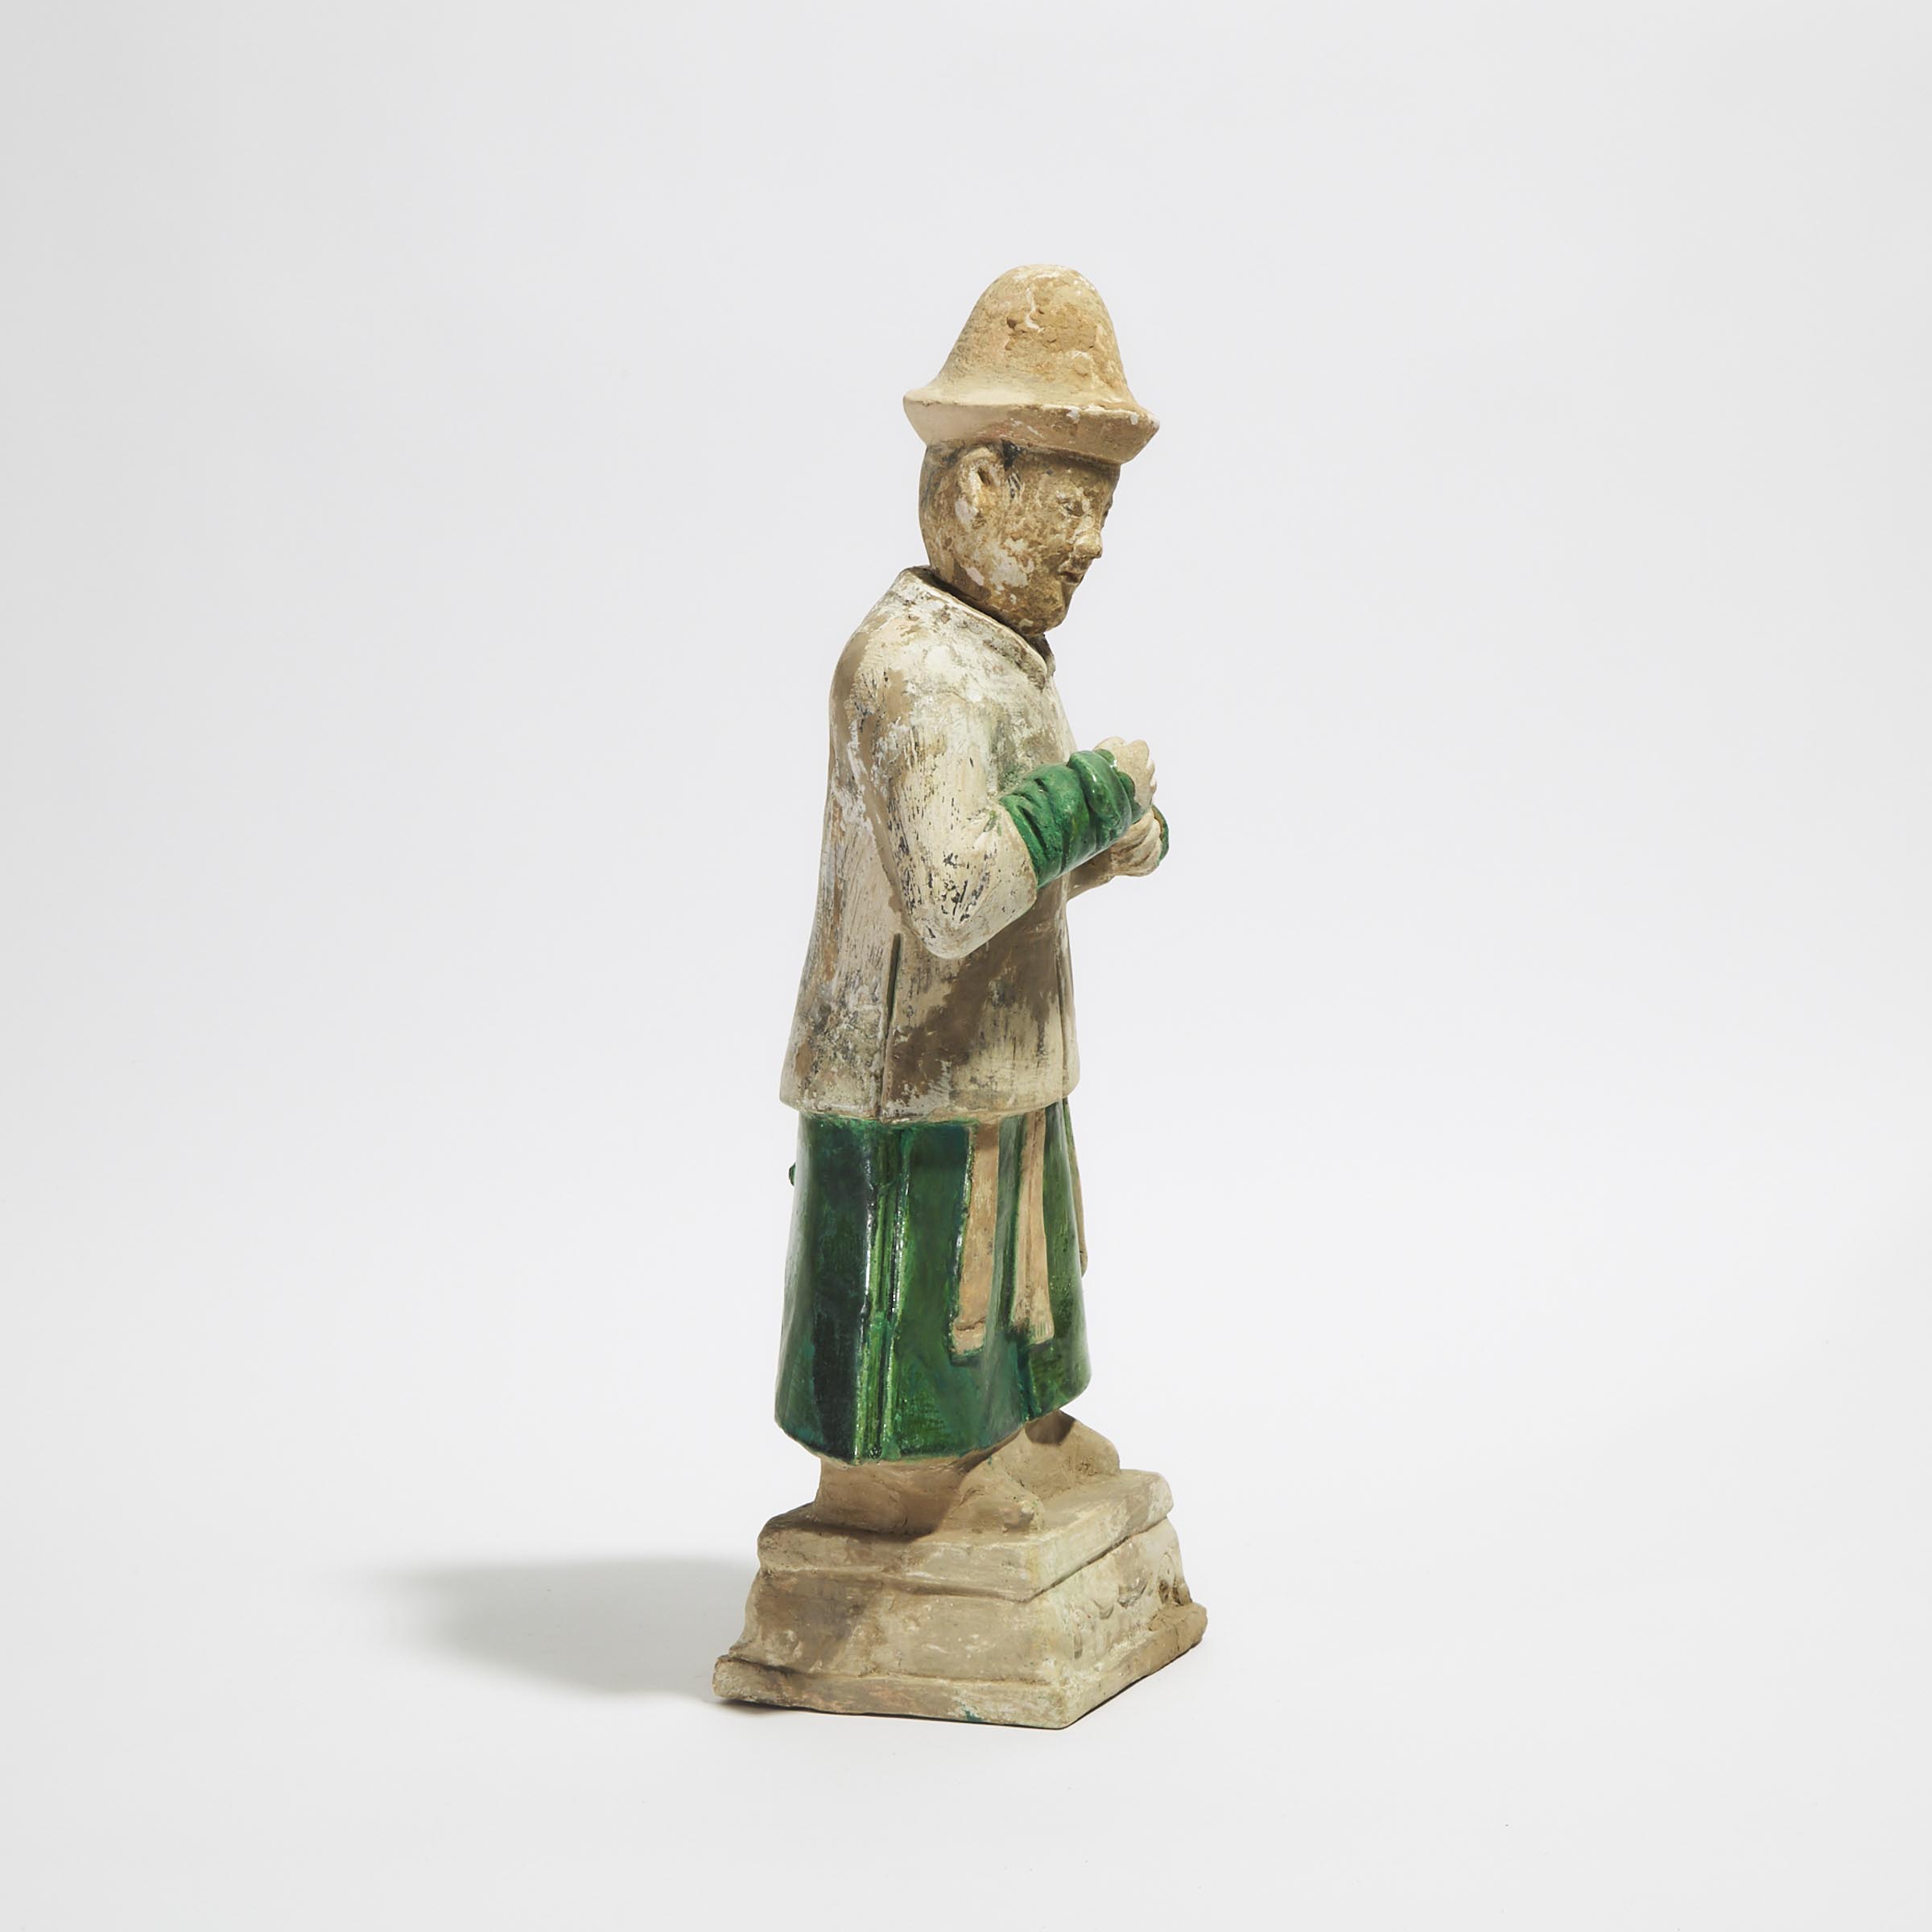 A Large Green-Glazed Tomb Attendant, Ming Dynasty (1368-1644)